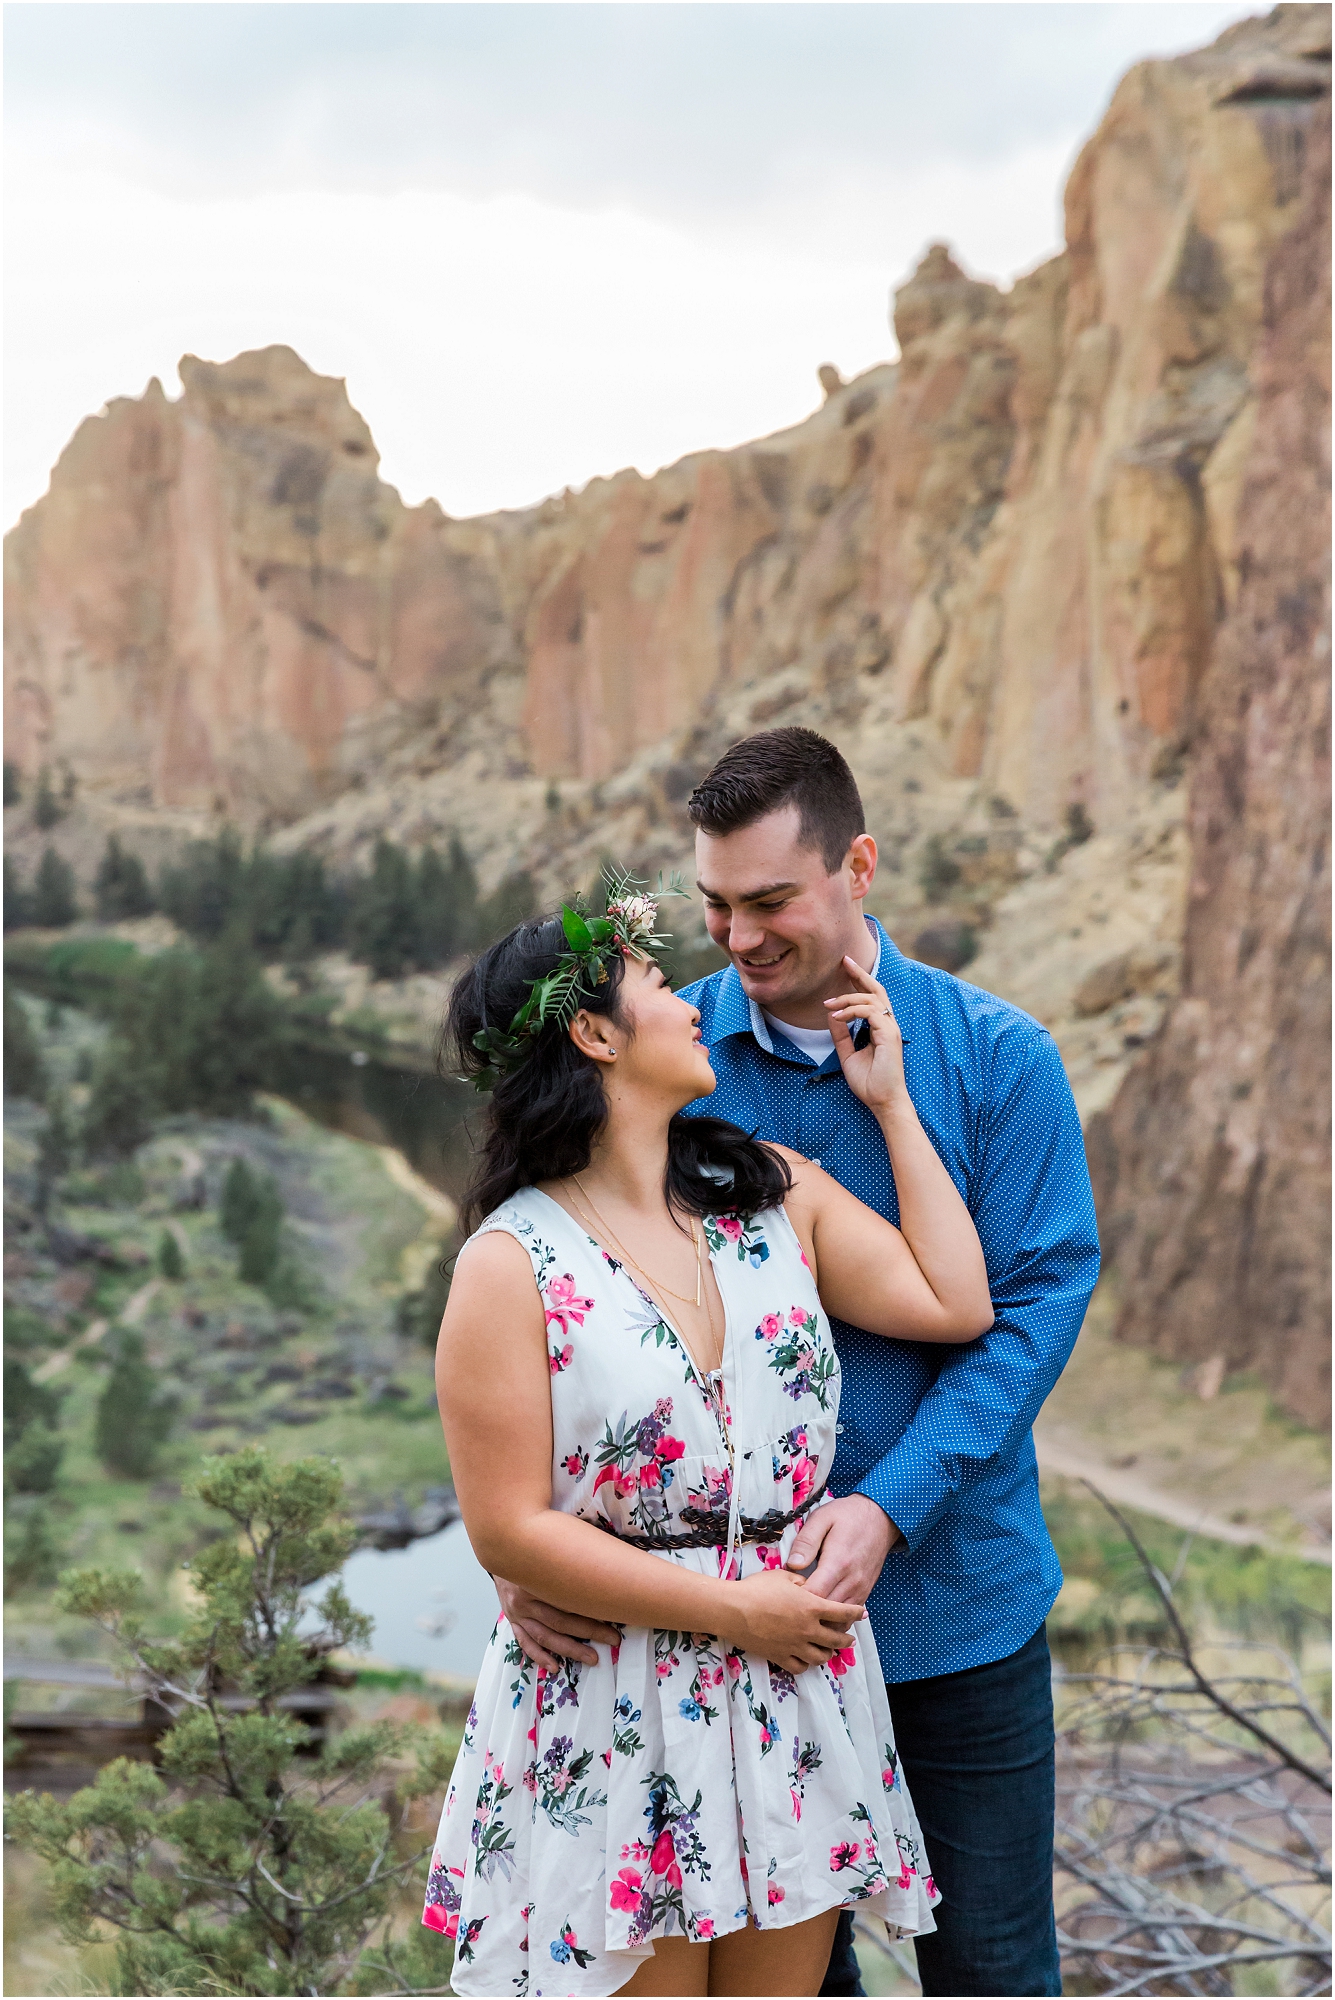 A bride in a floral dress and crown looks adoringly into her groom's eyes at their Smith Rock elopement near Bend, Oregon. | Erica Swantek Photography